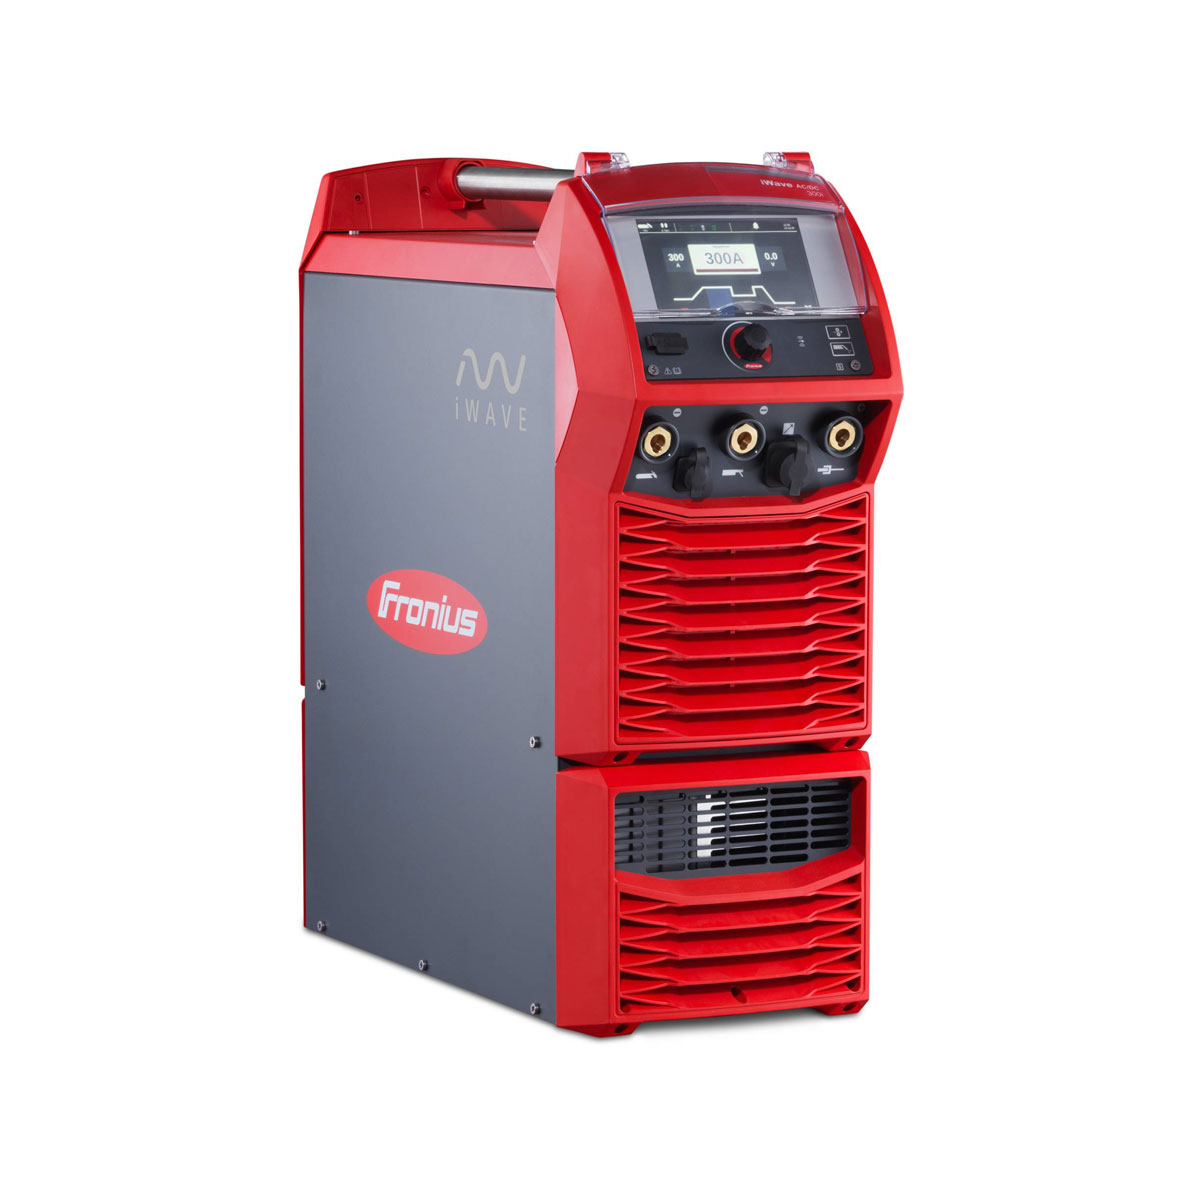 Fronius iWave 300i AC/DC, water-cooled/gas-cooled, 300 A, can be connected  to other devices via Bluetooth, wireless LAN and NFC ~ Fronius 4,075,250 ~  AC/DC iWave ~ 1968AIW0008 ~ Schweiss Shop